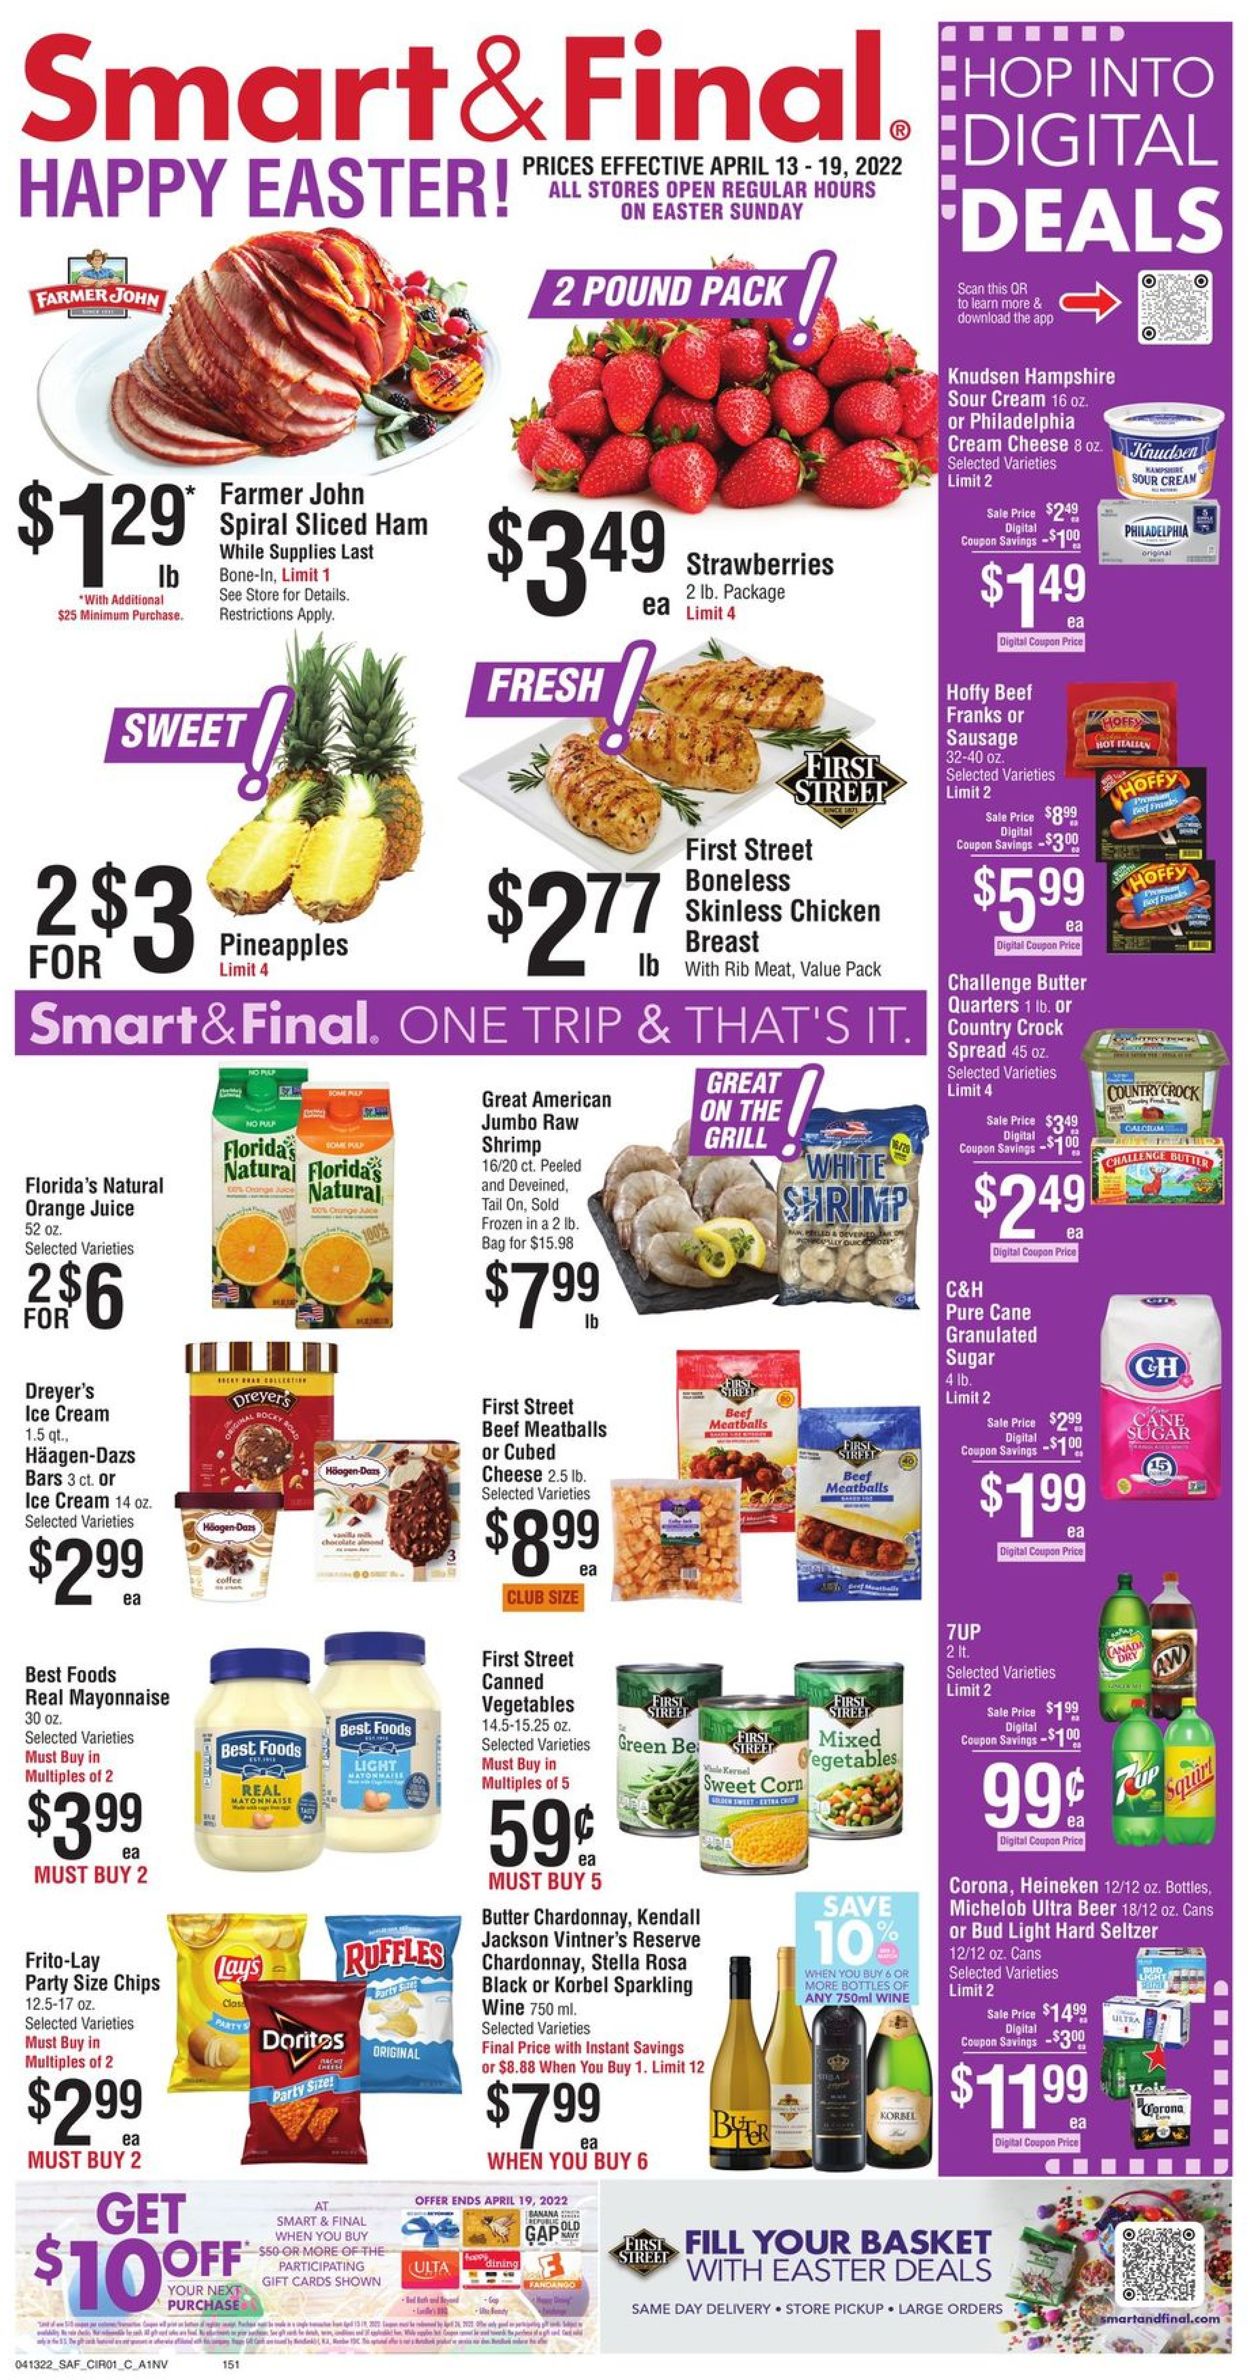 Smart and Final EASTER 2022 Weekly Ad Circular - valid 04/13-04/19/2022